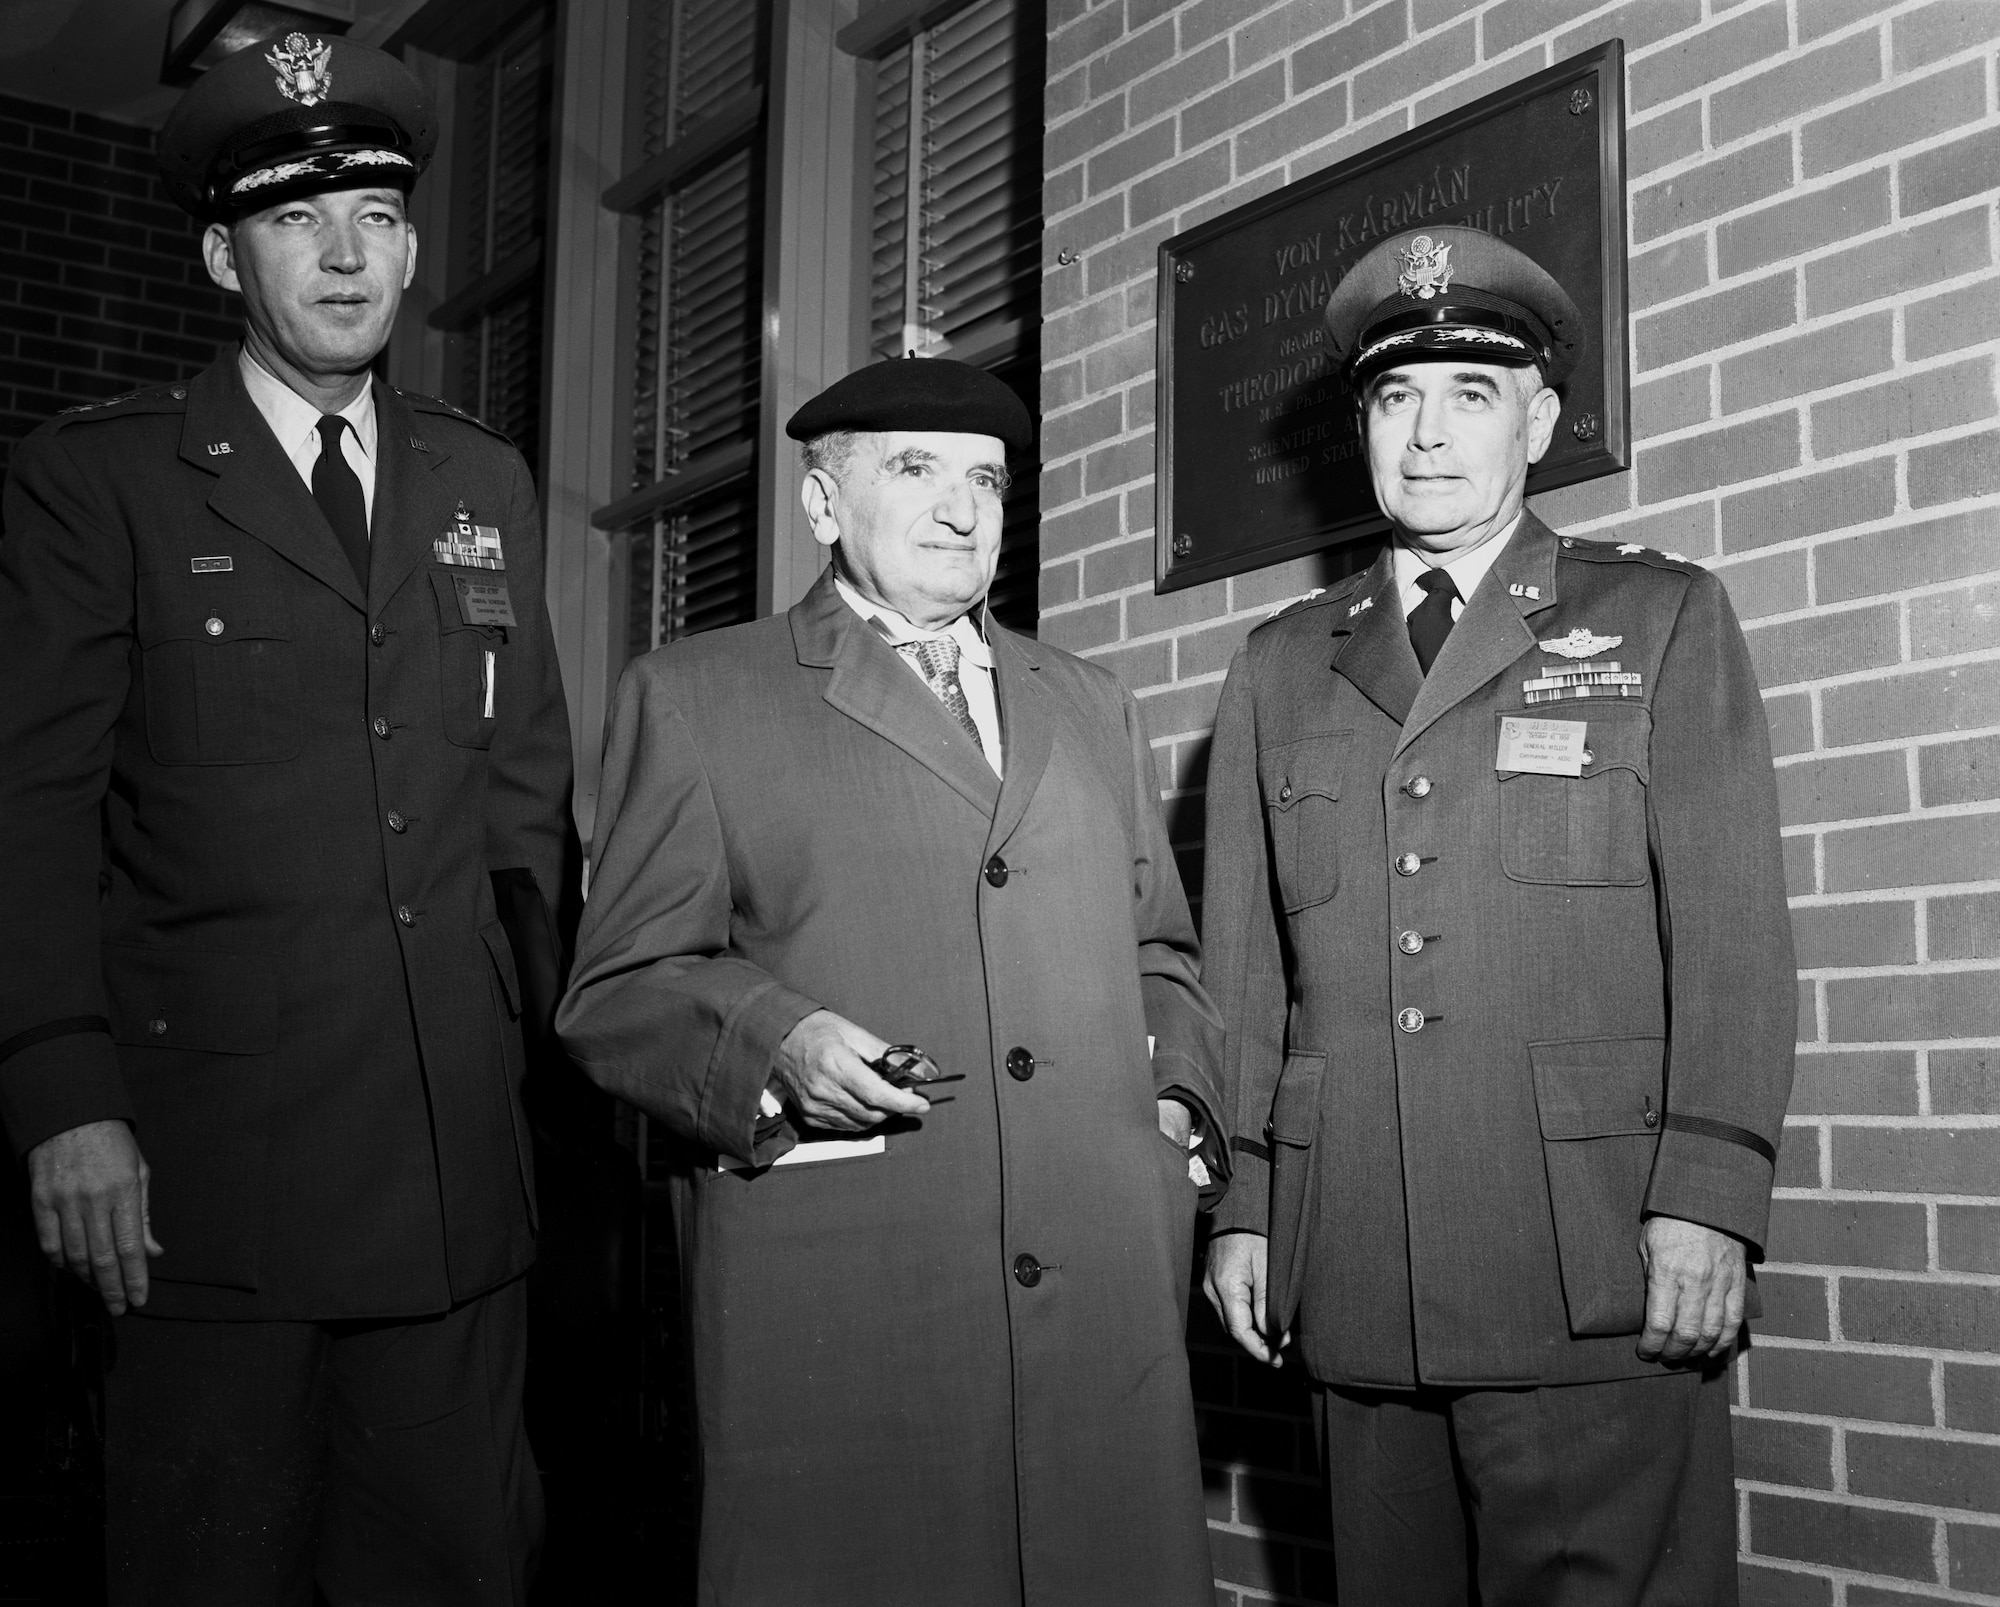 Then-Lt. Gen. Bernard A. Schriever, left, then-commander of the Air Research and Development Command; Dr. Theodore von Kármán; and then-Maj. Gen. Troup Miller Jr., then-commander of Arnold Engineering Development Center, are photographed at the Oct. 30, 1959, dedication of the Gas Dynamics Facility at Arnold Air Force Base, Tenn., in honor of von Kármán. (U.S. Air Force photo)